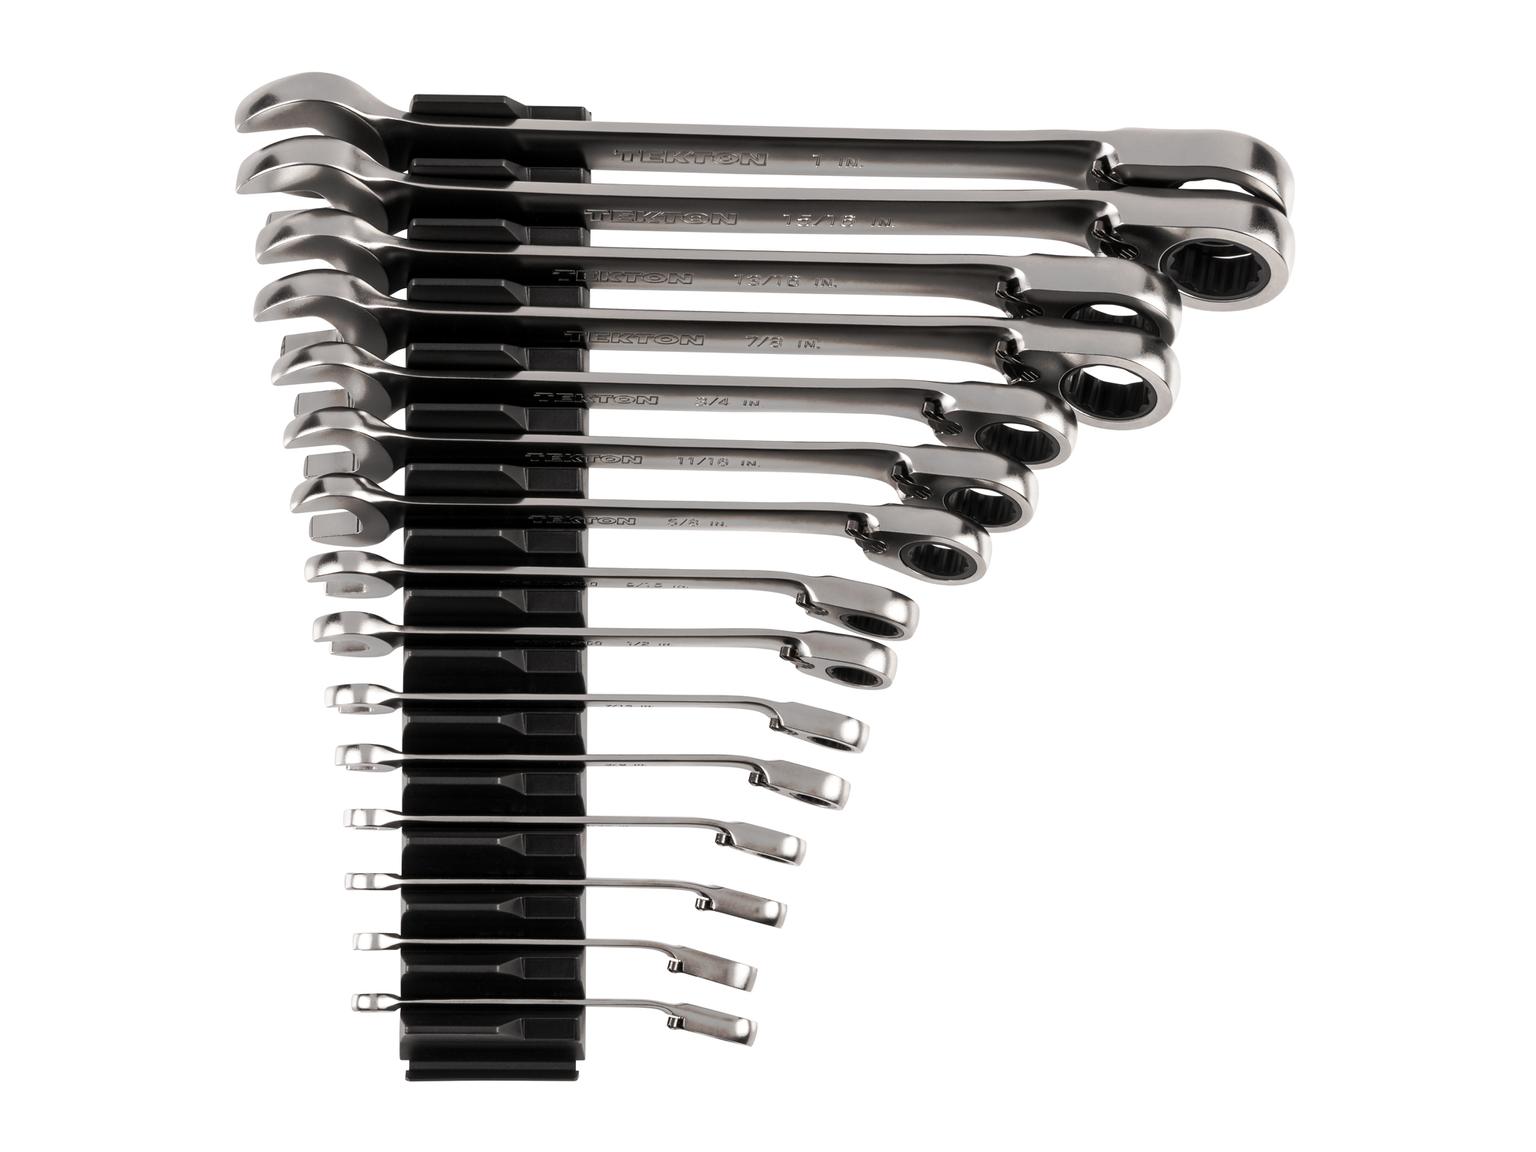 Reversible 12-Point Ratcheting Combination Wrench Set, 15-Piece (Modular Slotted Organizer)